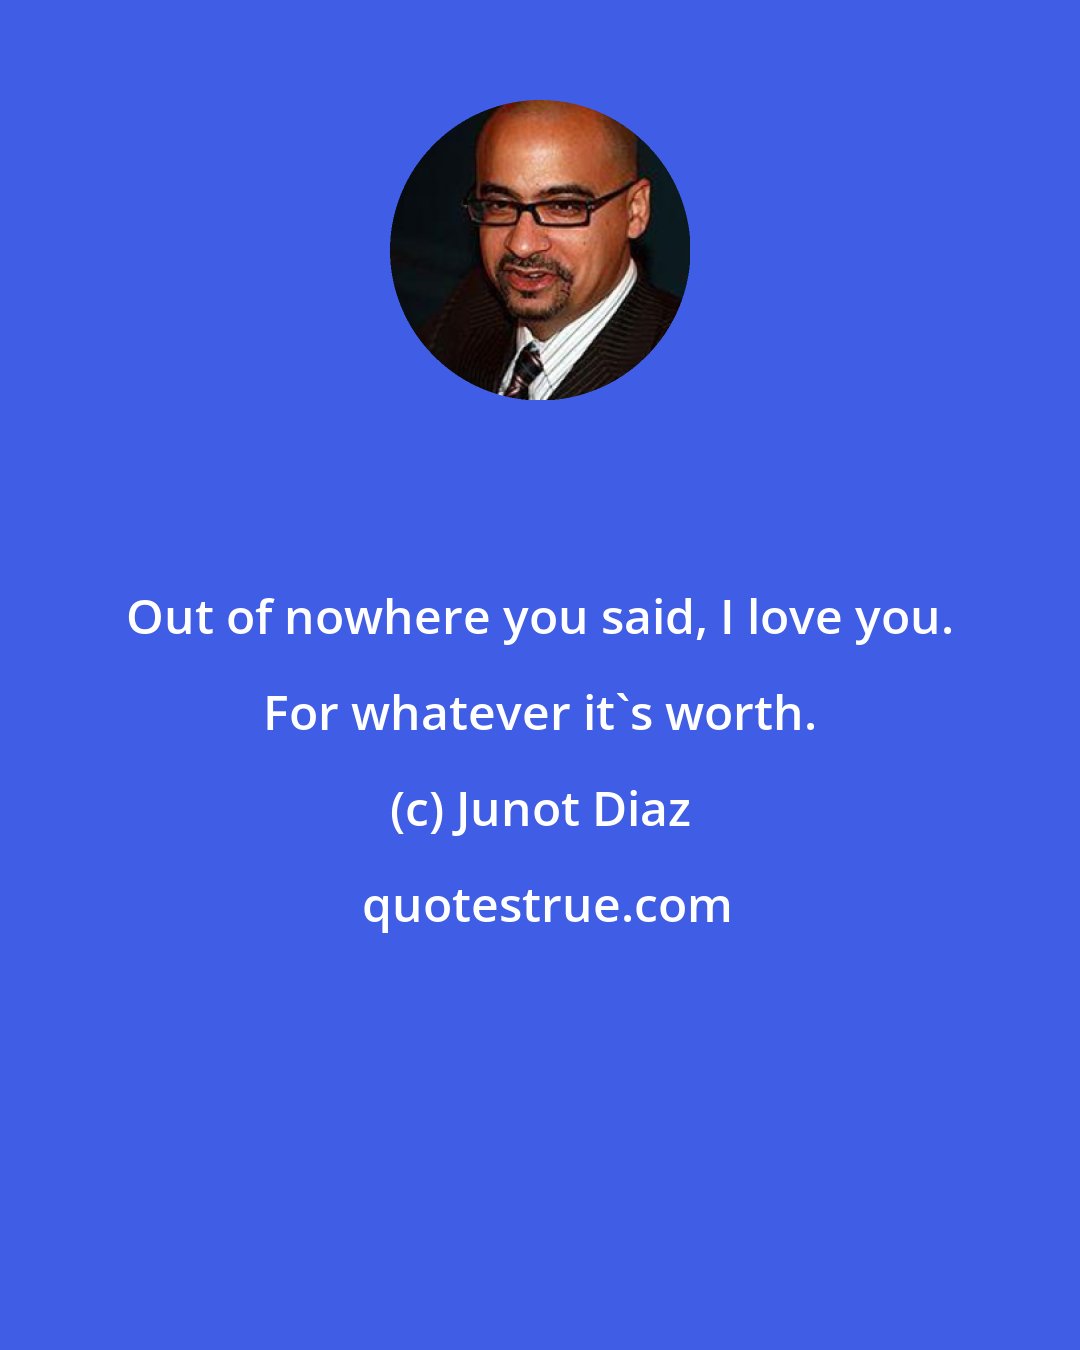 Junot Diaz: Out of nowhere you said, I love you. For whatever it's worth.